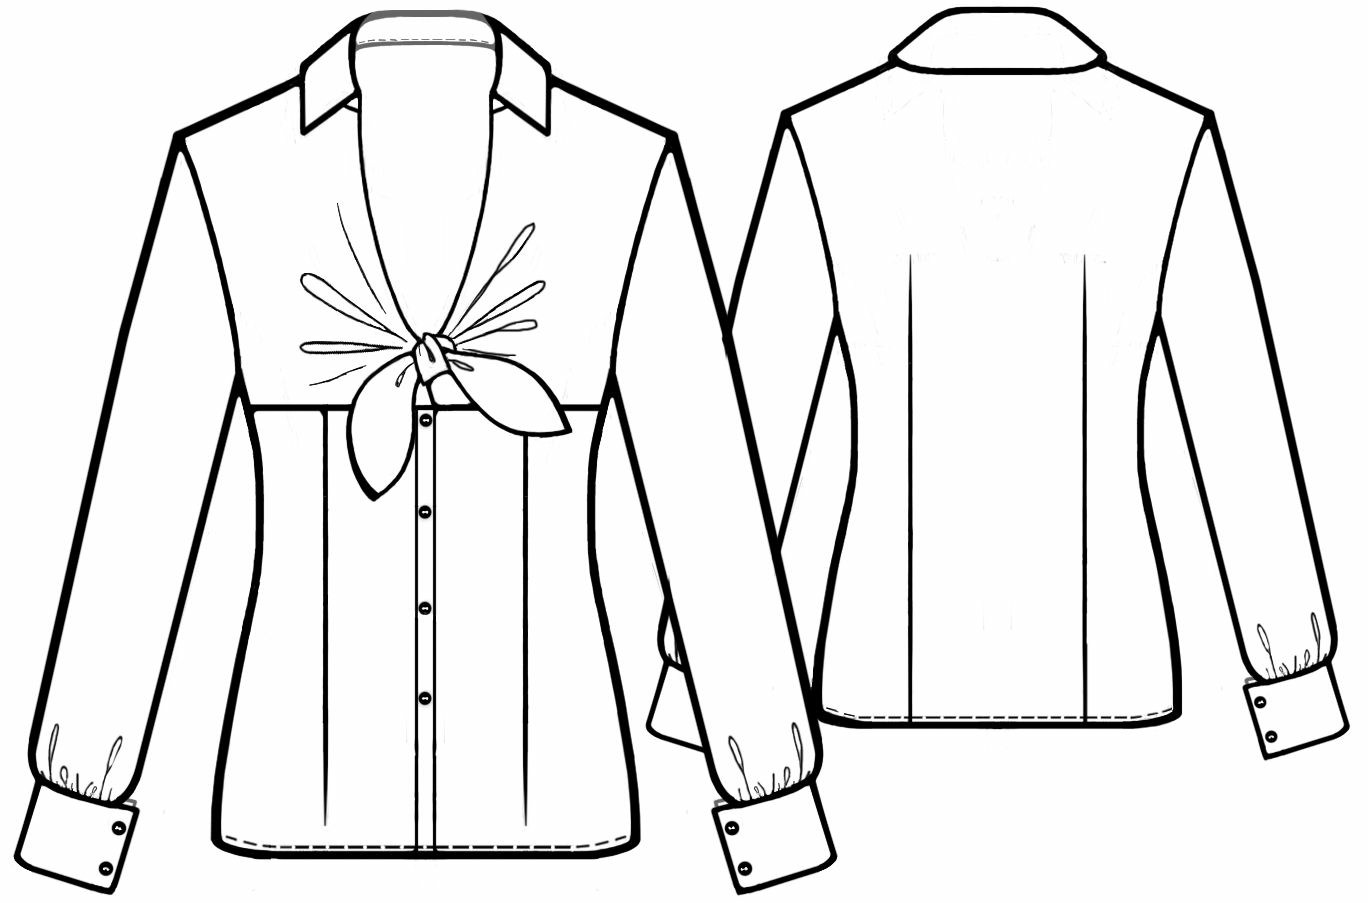 Blouse With Bow - Sewing Pattern #5616. Made-to-measure sewing pattern ...